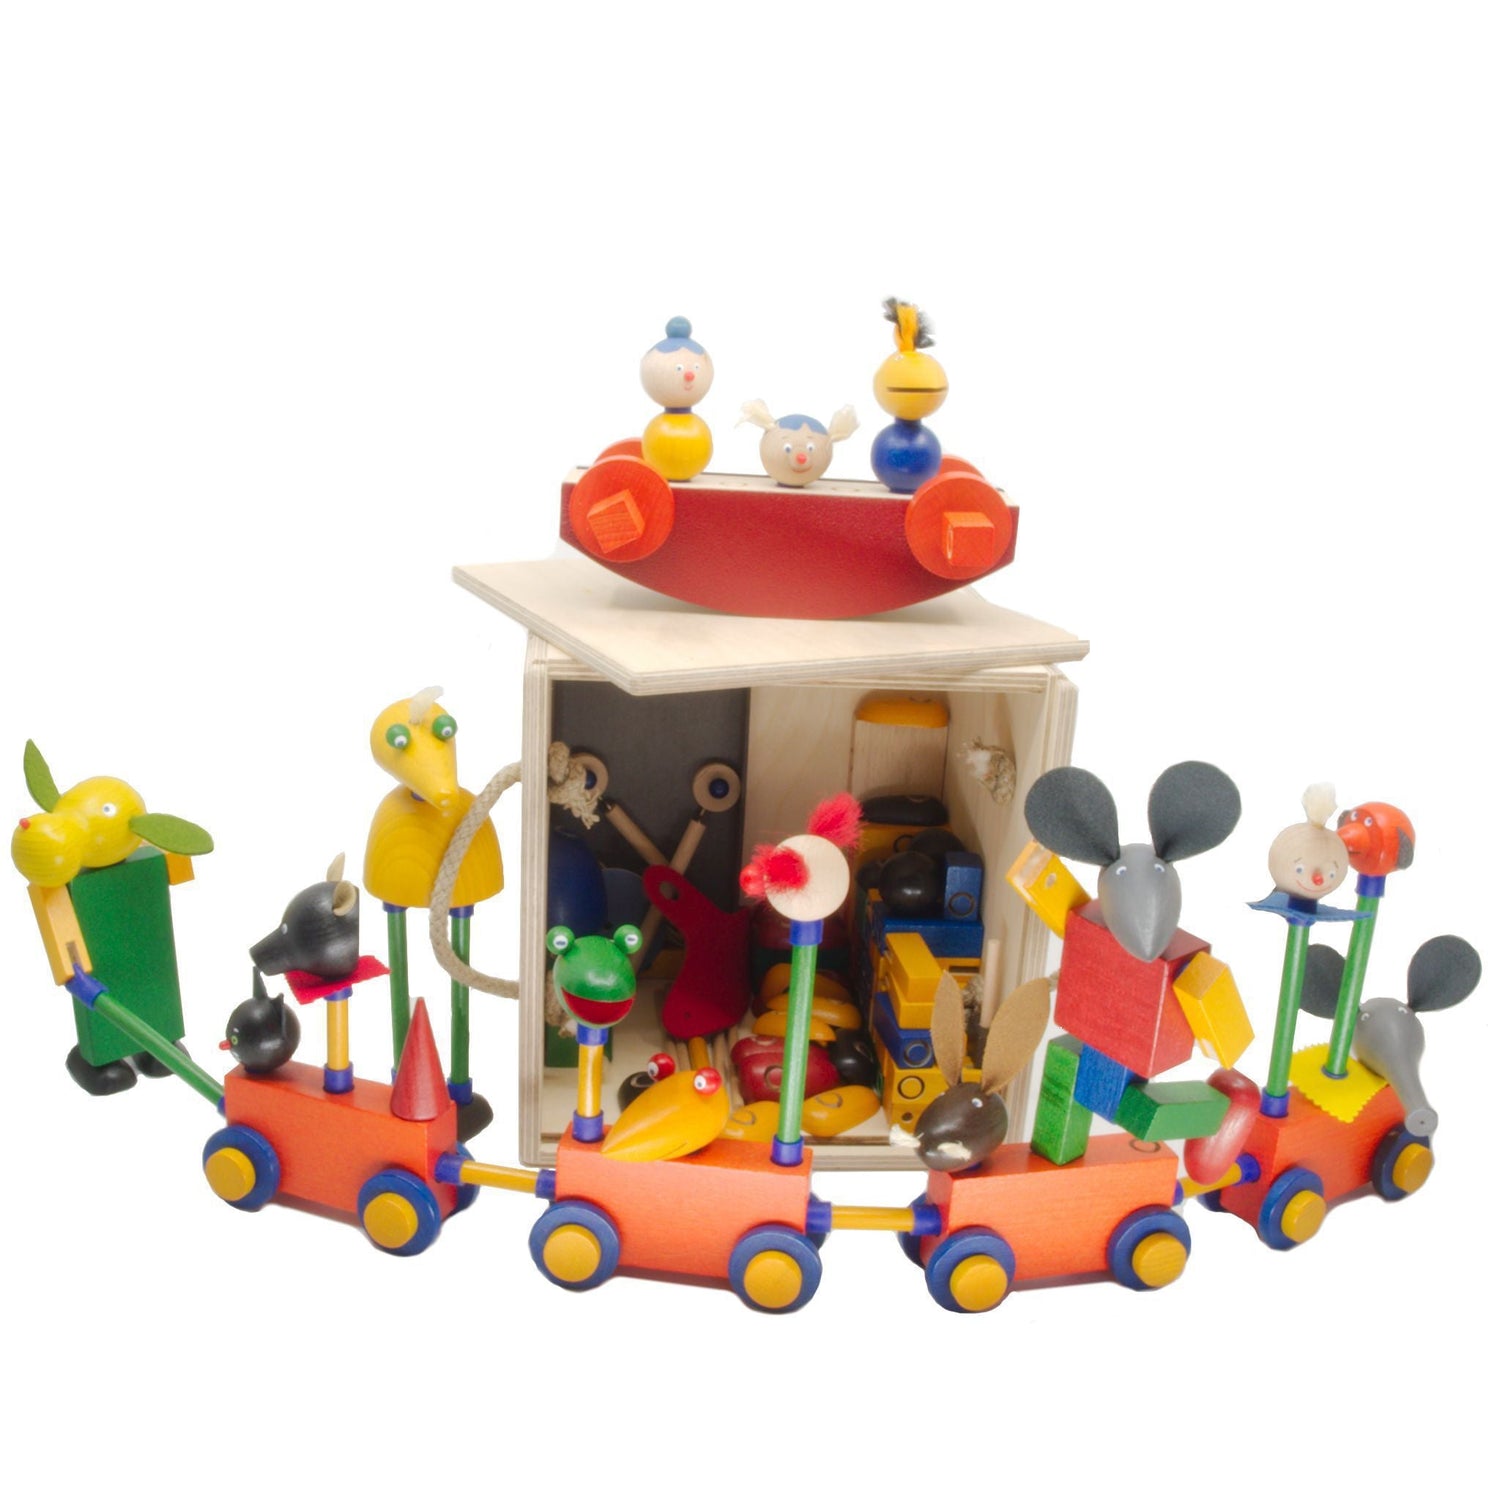 Wooden construction toys